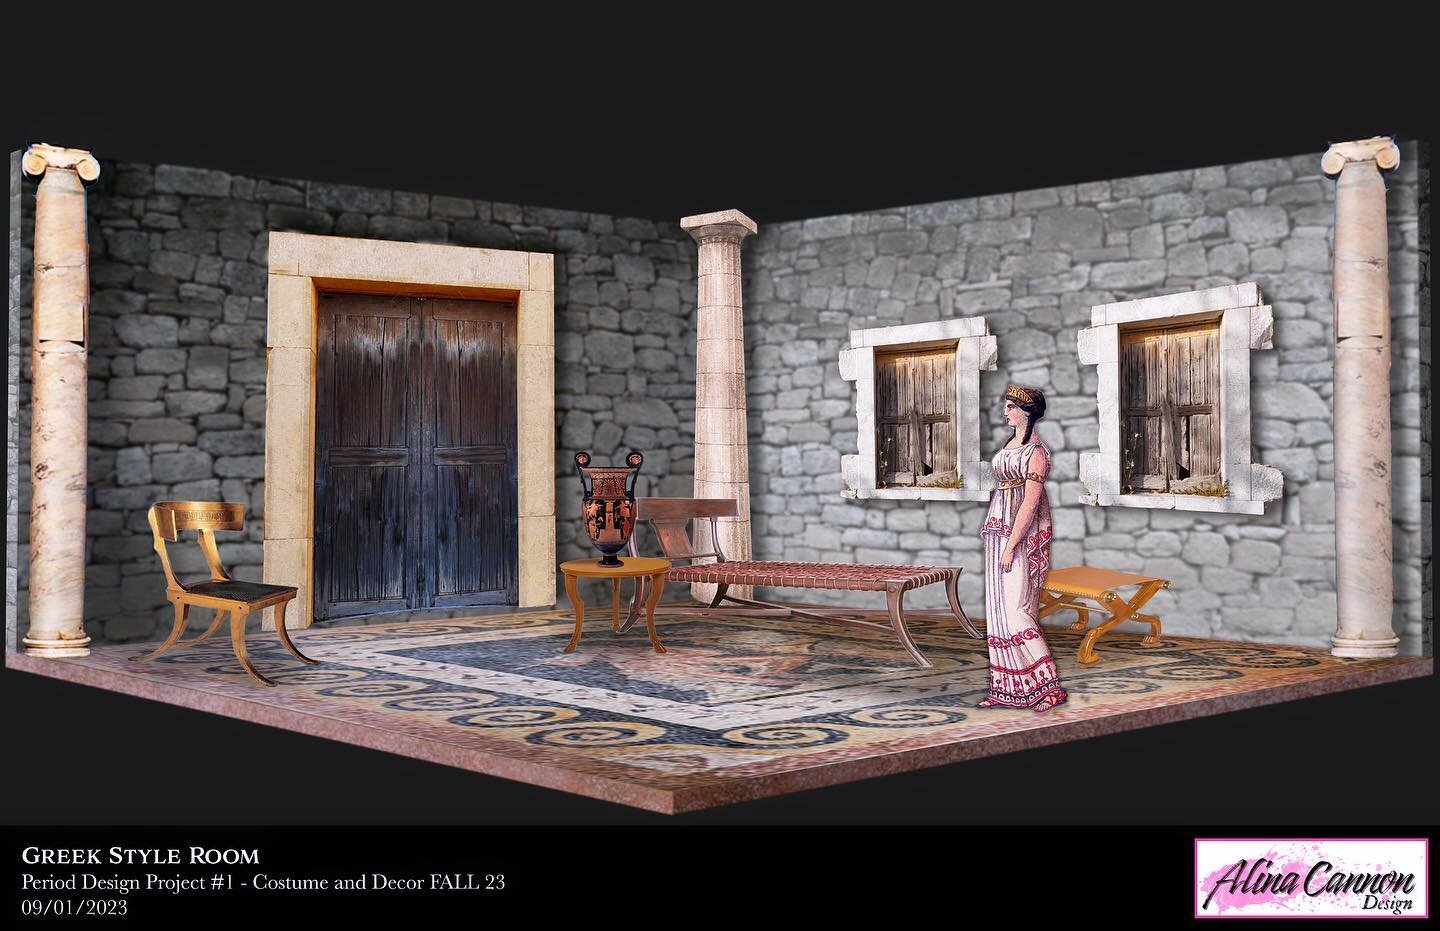 Halfway through the semester, and halfway through costume and decor class. Renderings based on Greek, Roman, Islamic, gothic, and baroque architecture and furniture/decor. Photoshop for the win! #photoshop #rendering #scenicdesigner #scenicdesign